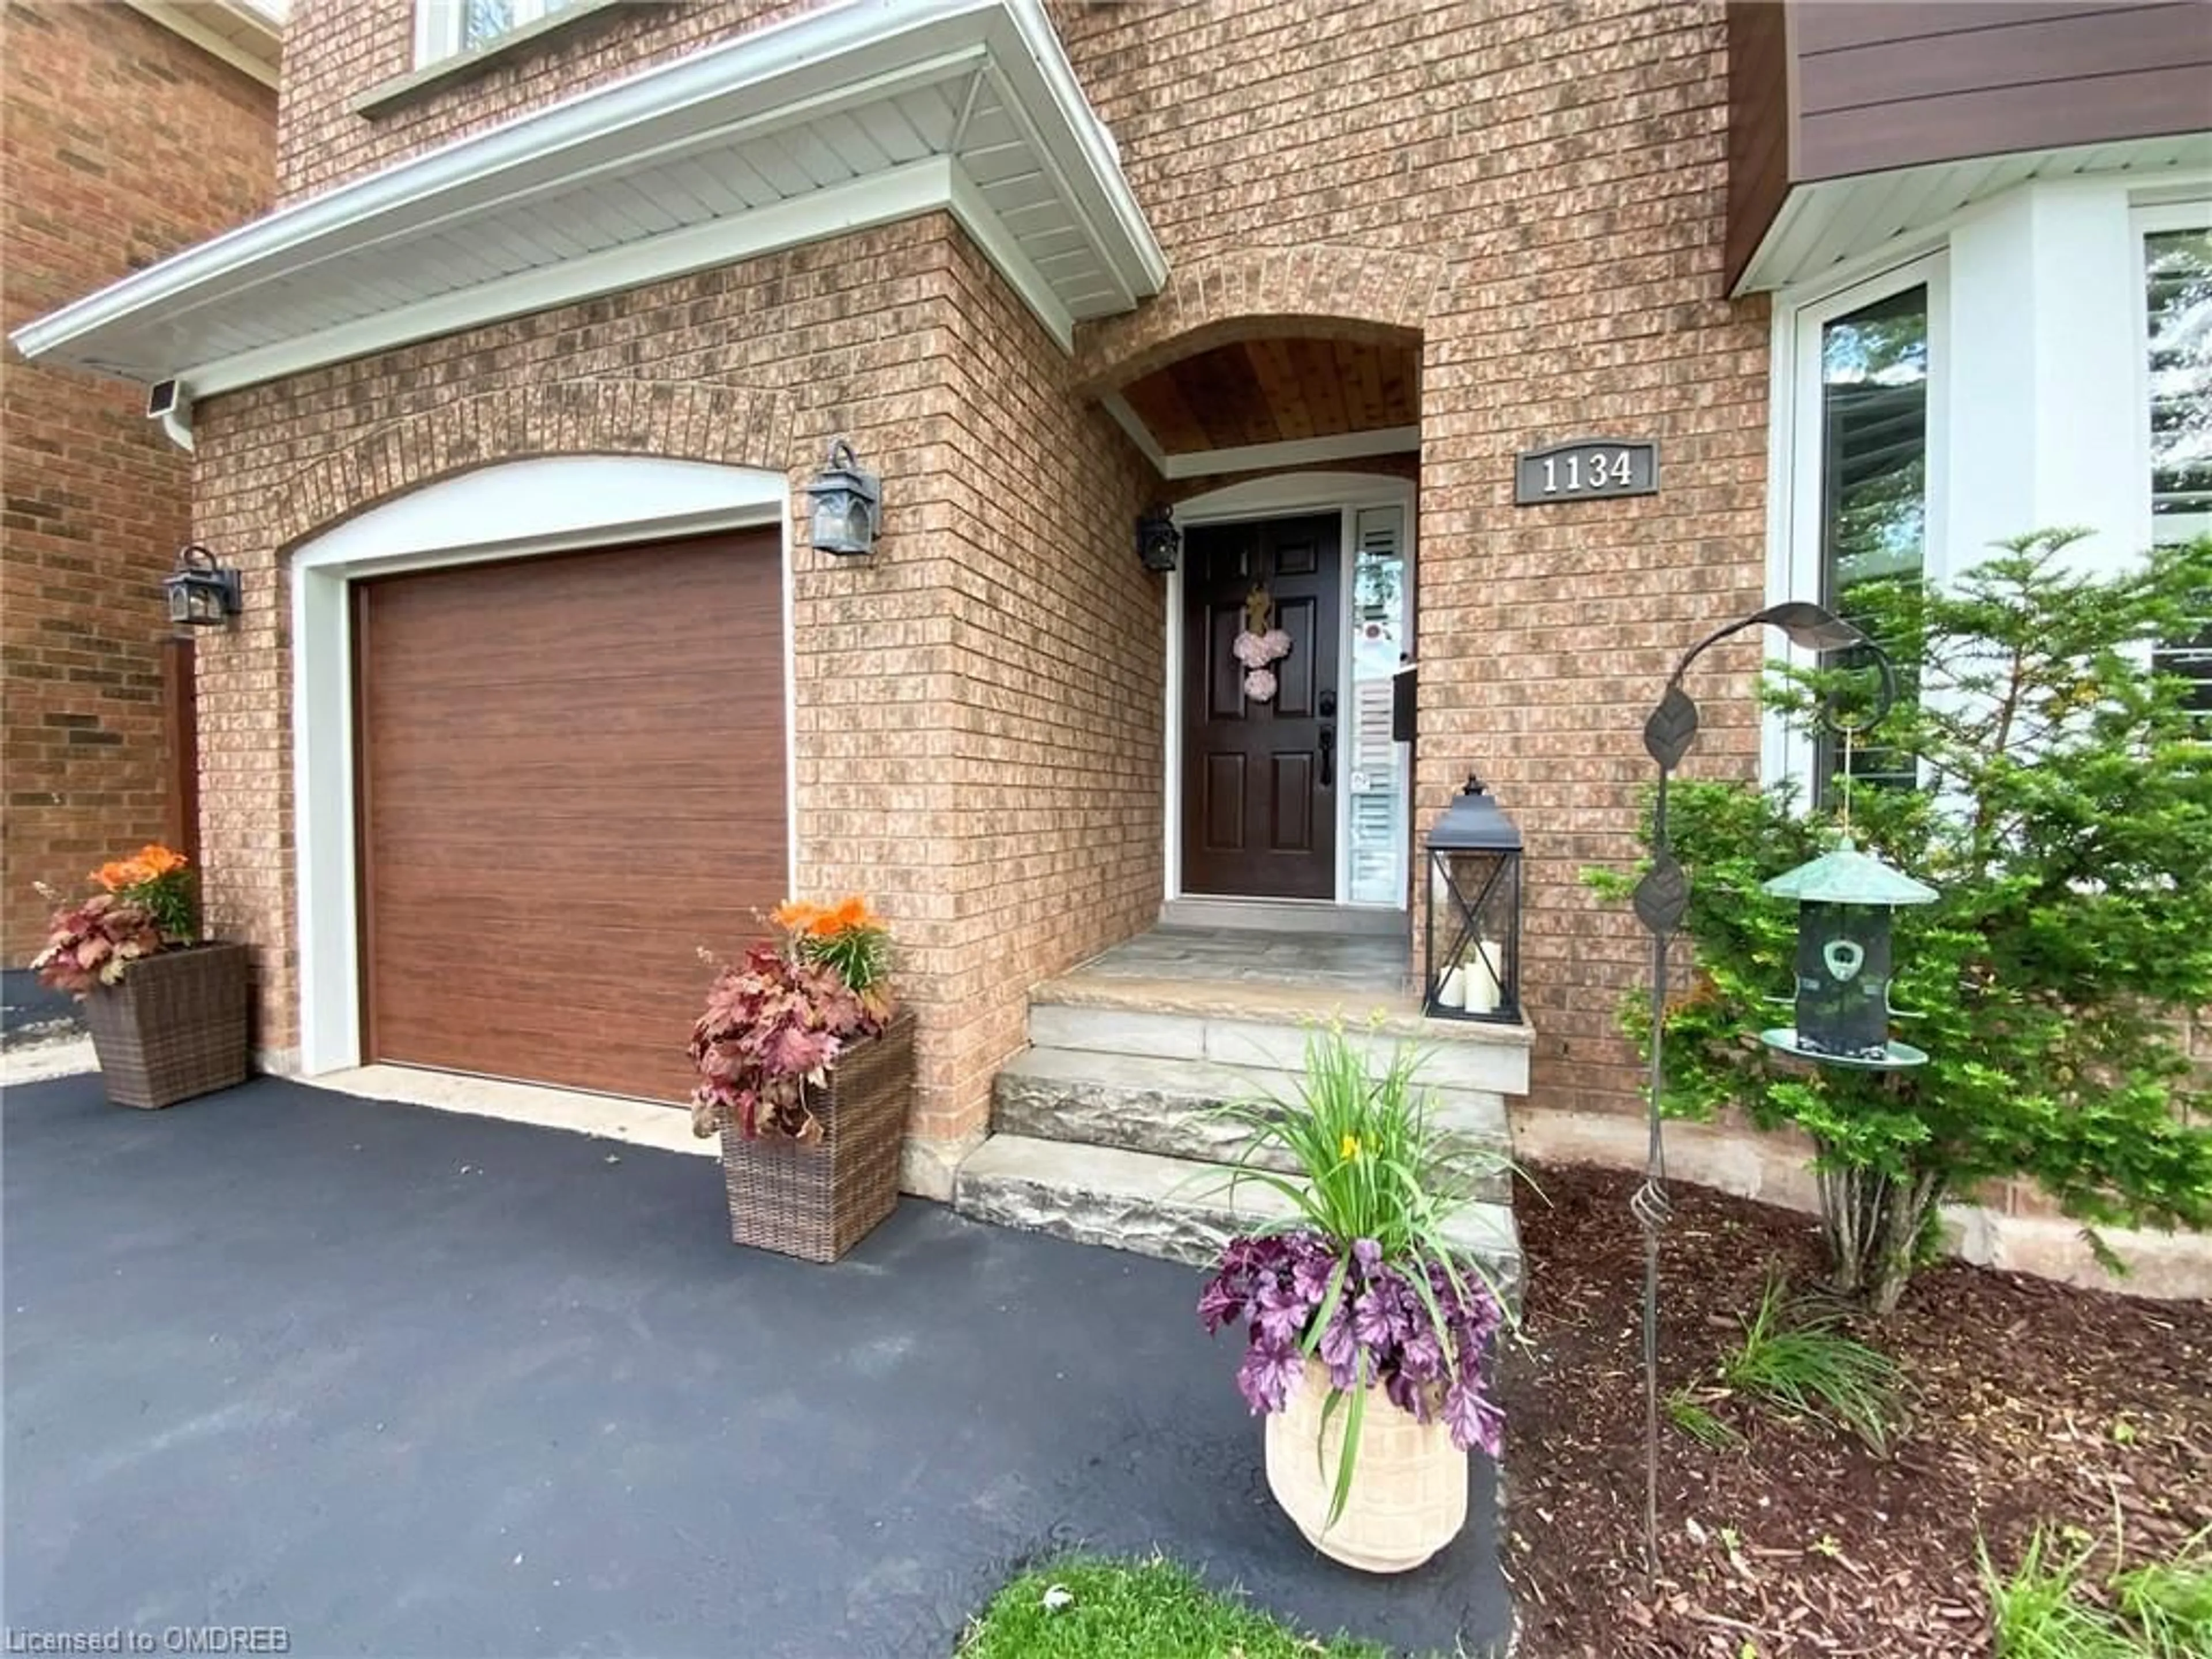 Home with brick exterior material for 1134 Glen Valley Rd, Oakville Ontario L6M 3K8